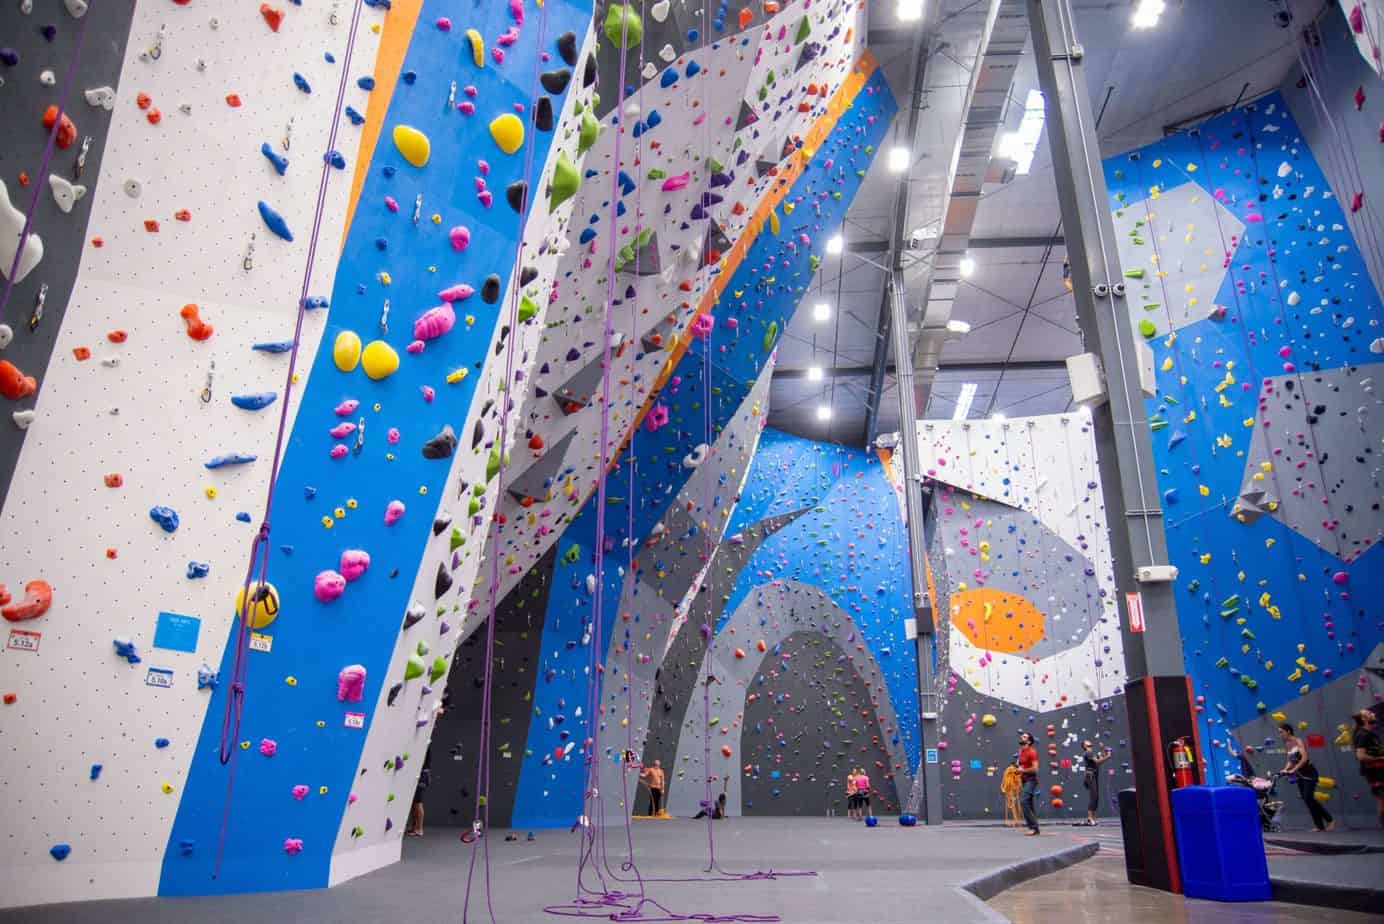 Artificial Climbing Wall feature and Structure in a climbing gym_RMC